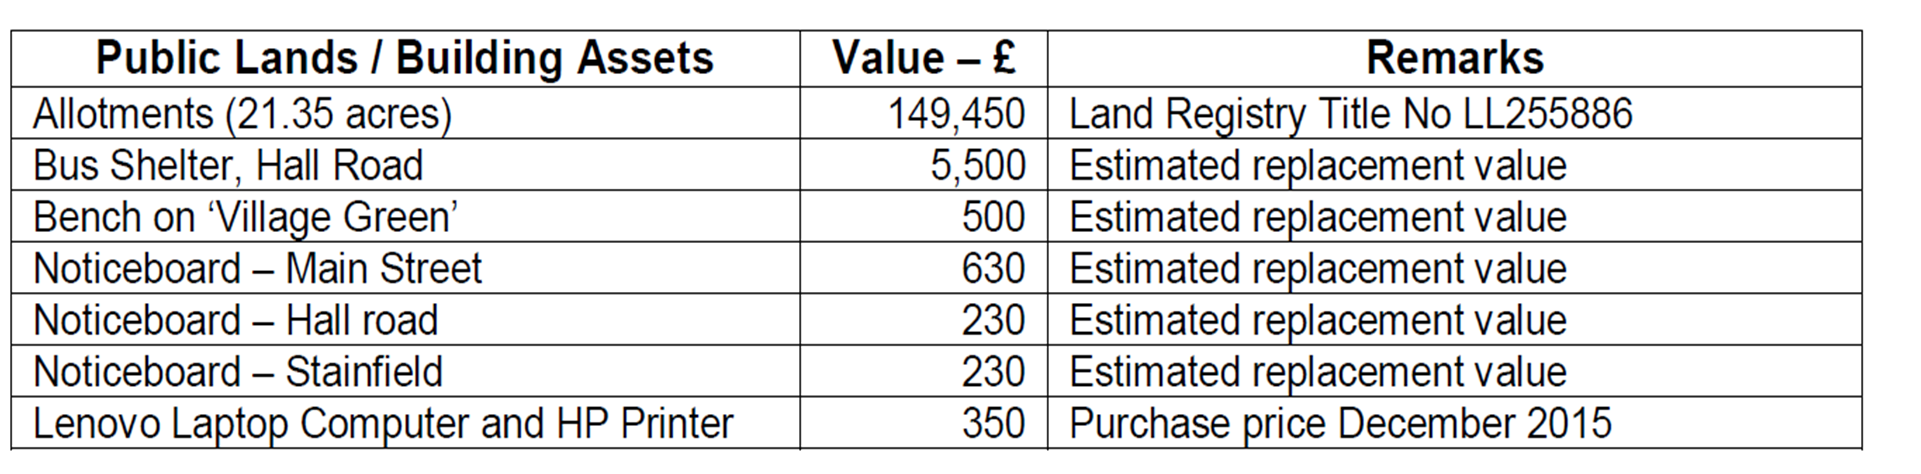 Image of assets table